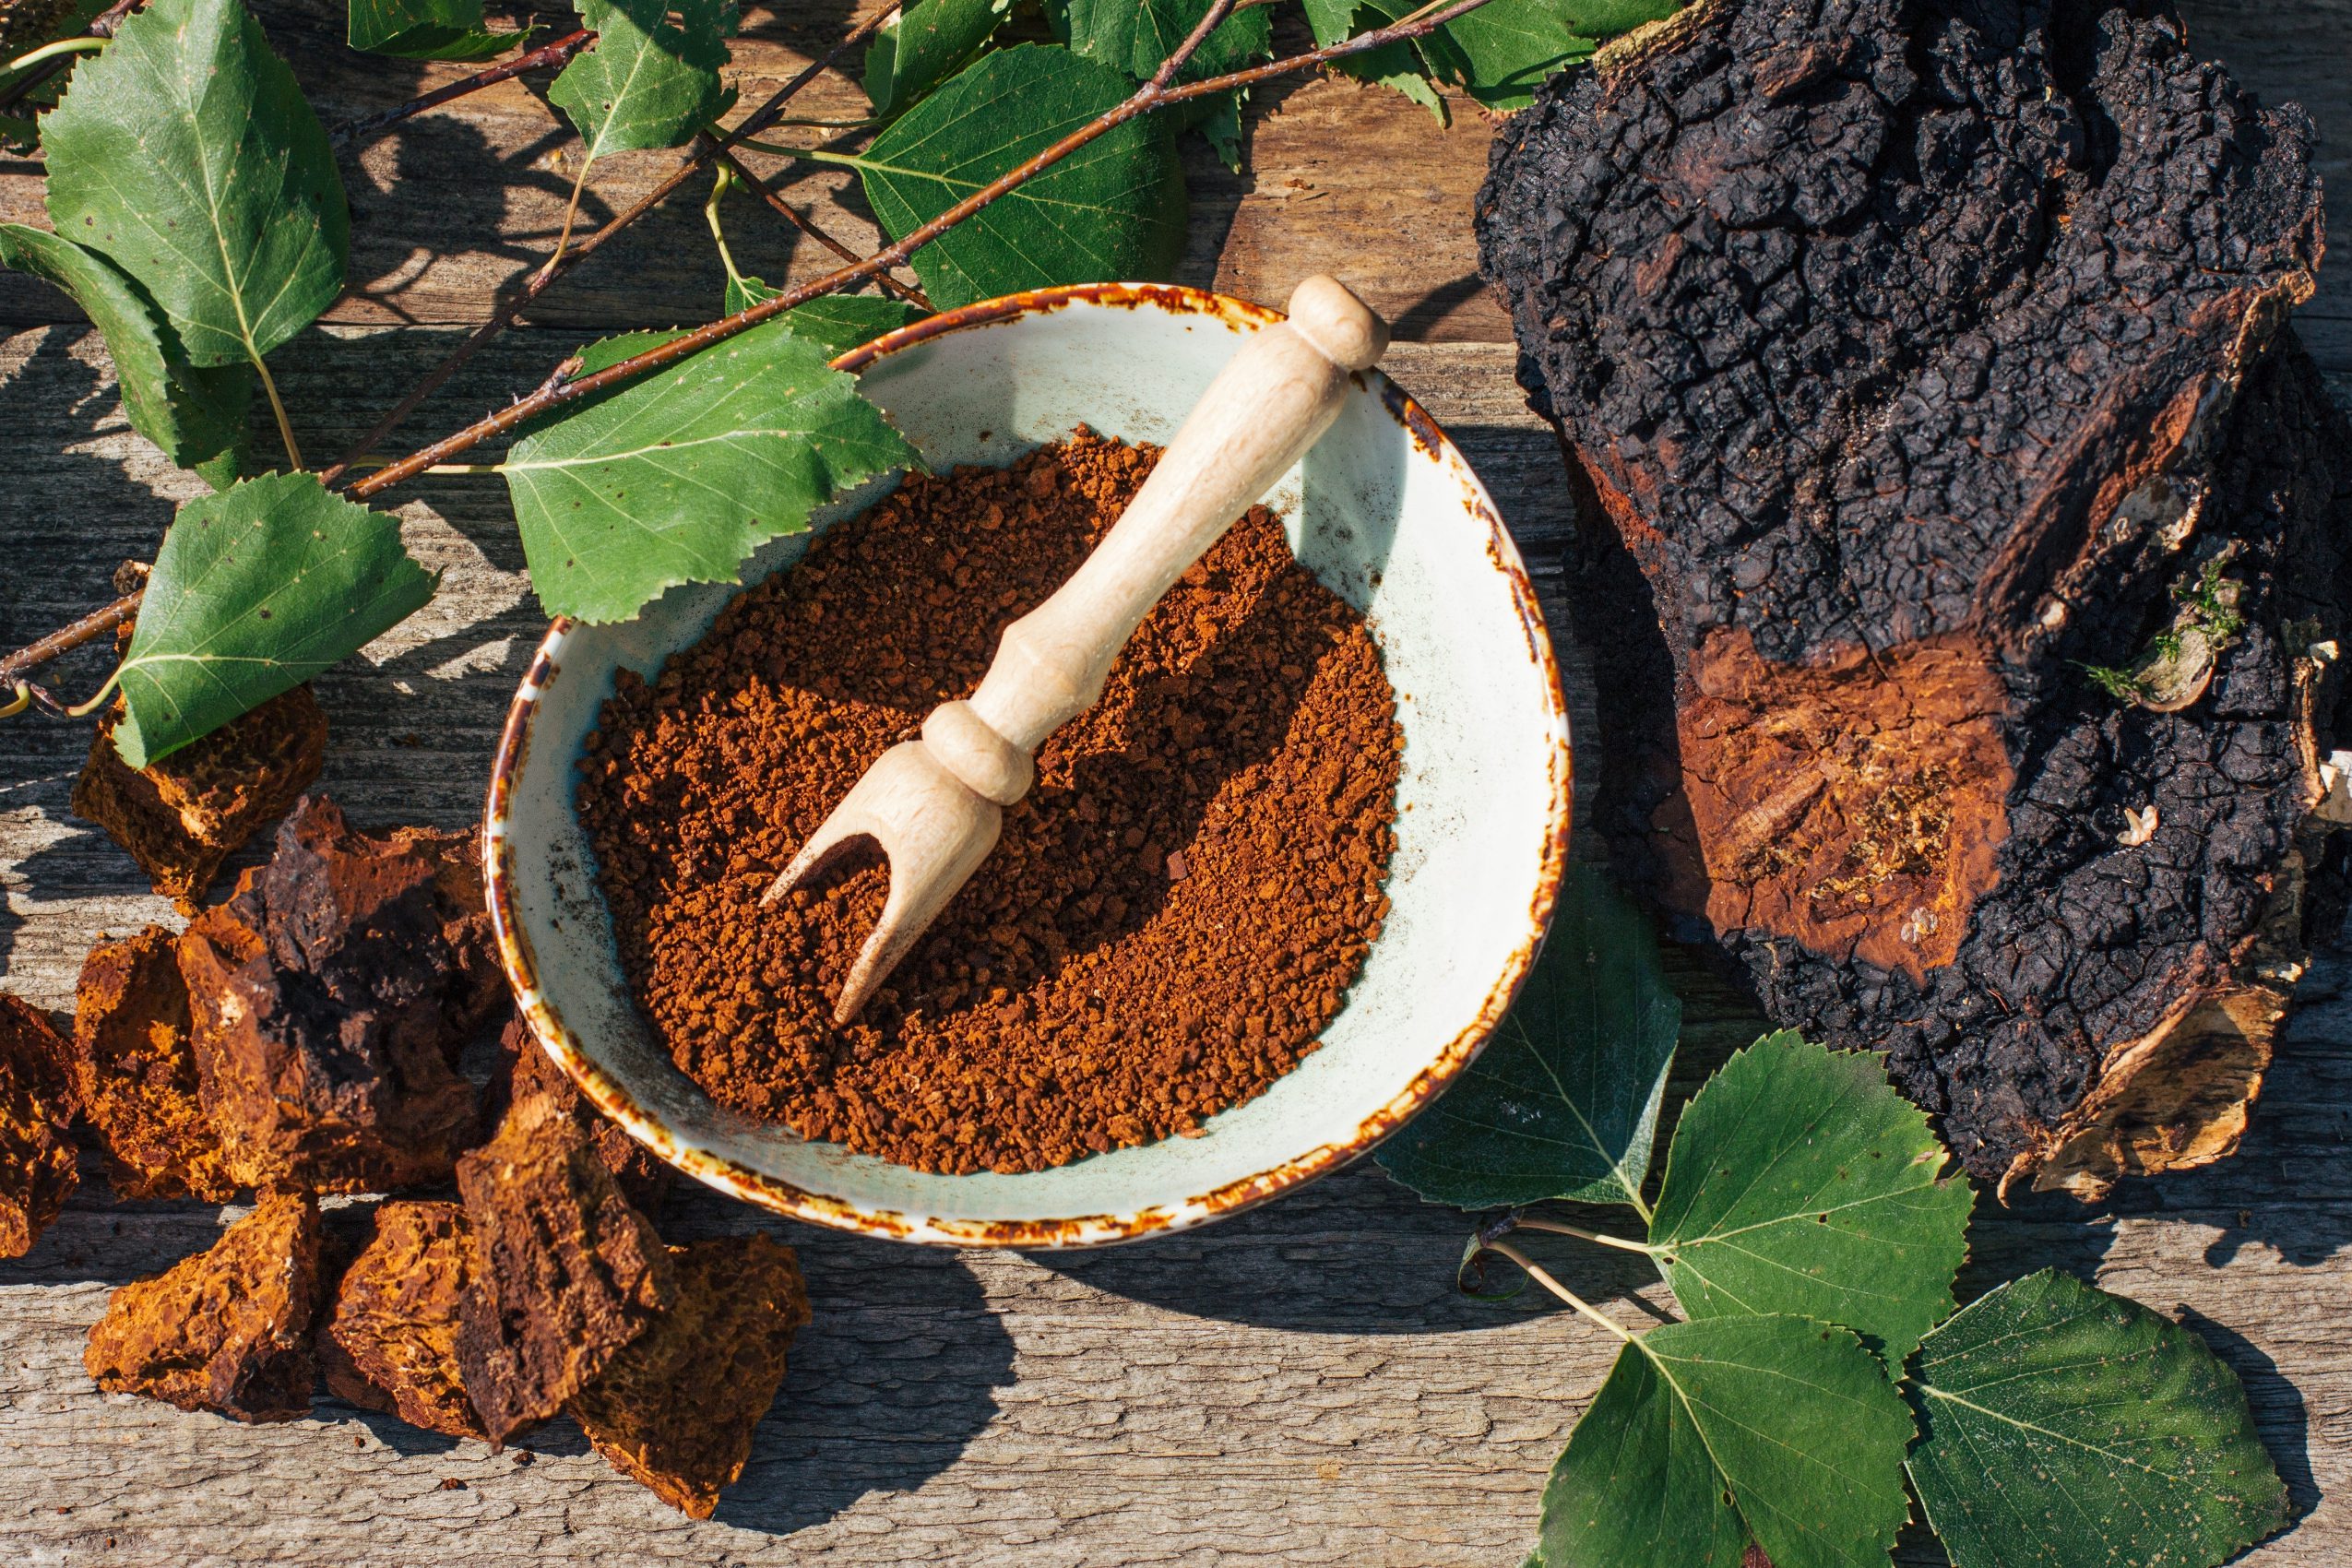 Ground chaga in a bowl with a scoop